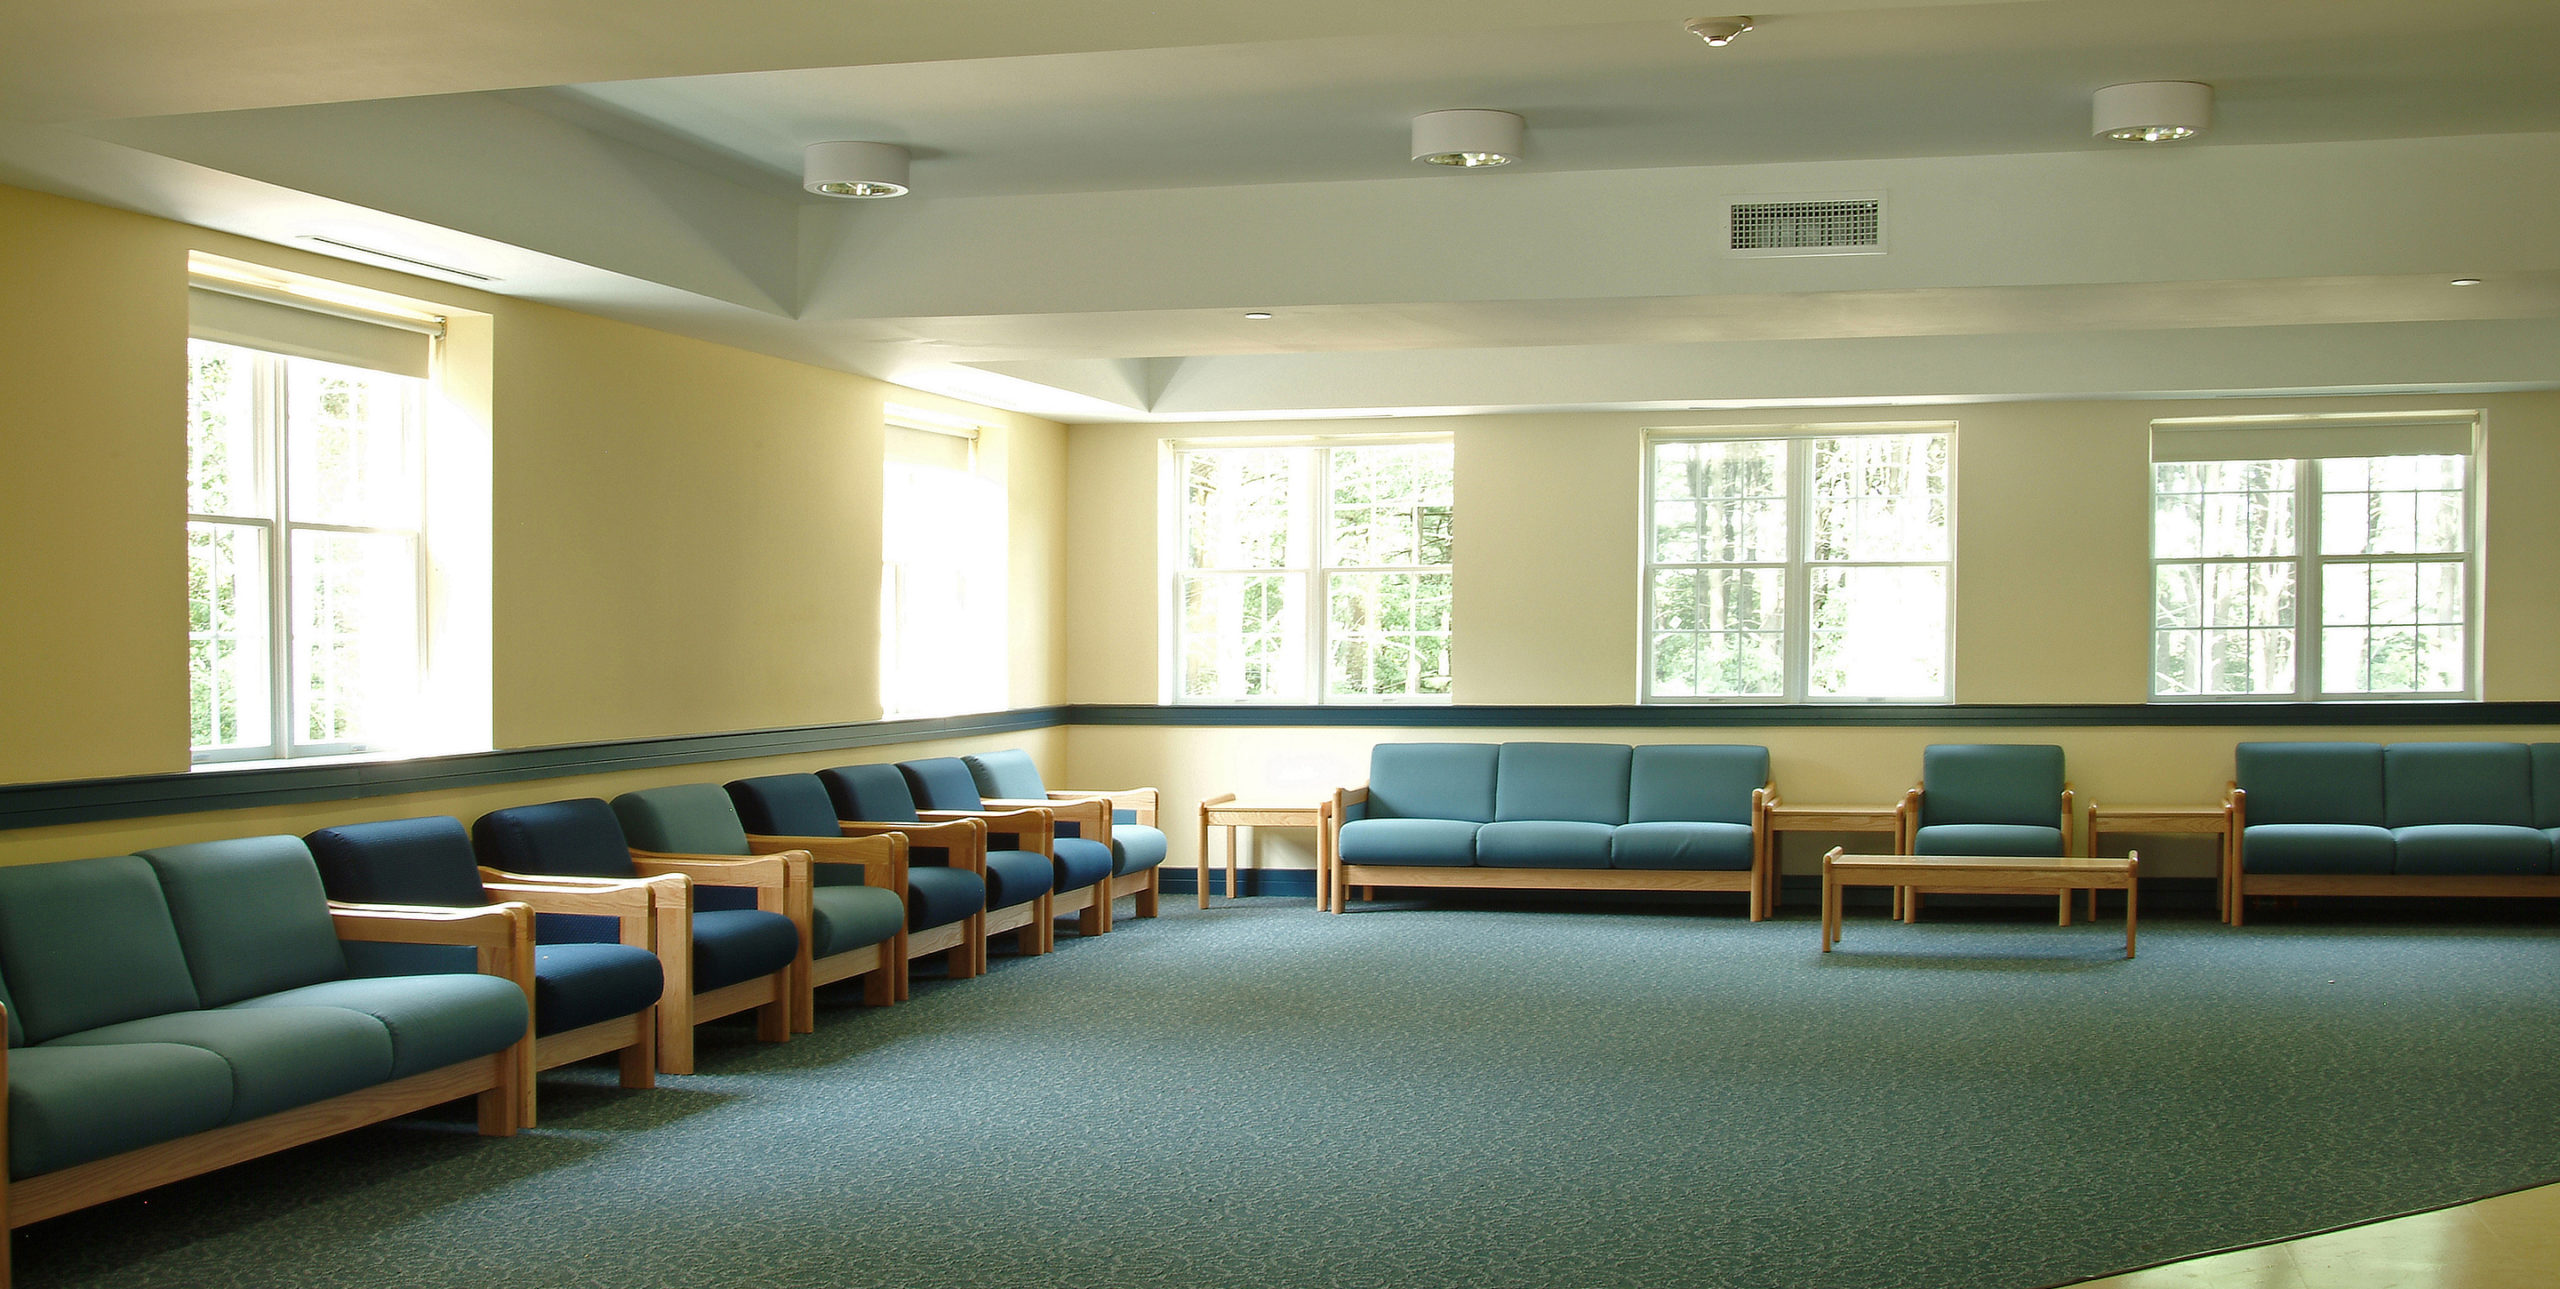 Lobby of Five Towns College Dormitories in Dix Hills, NY